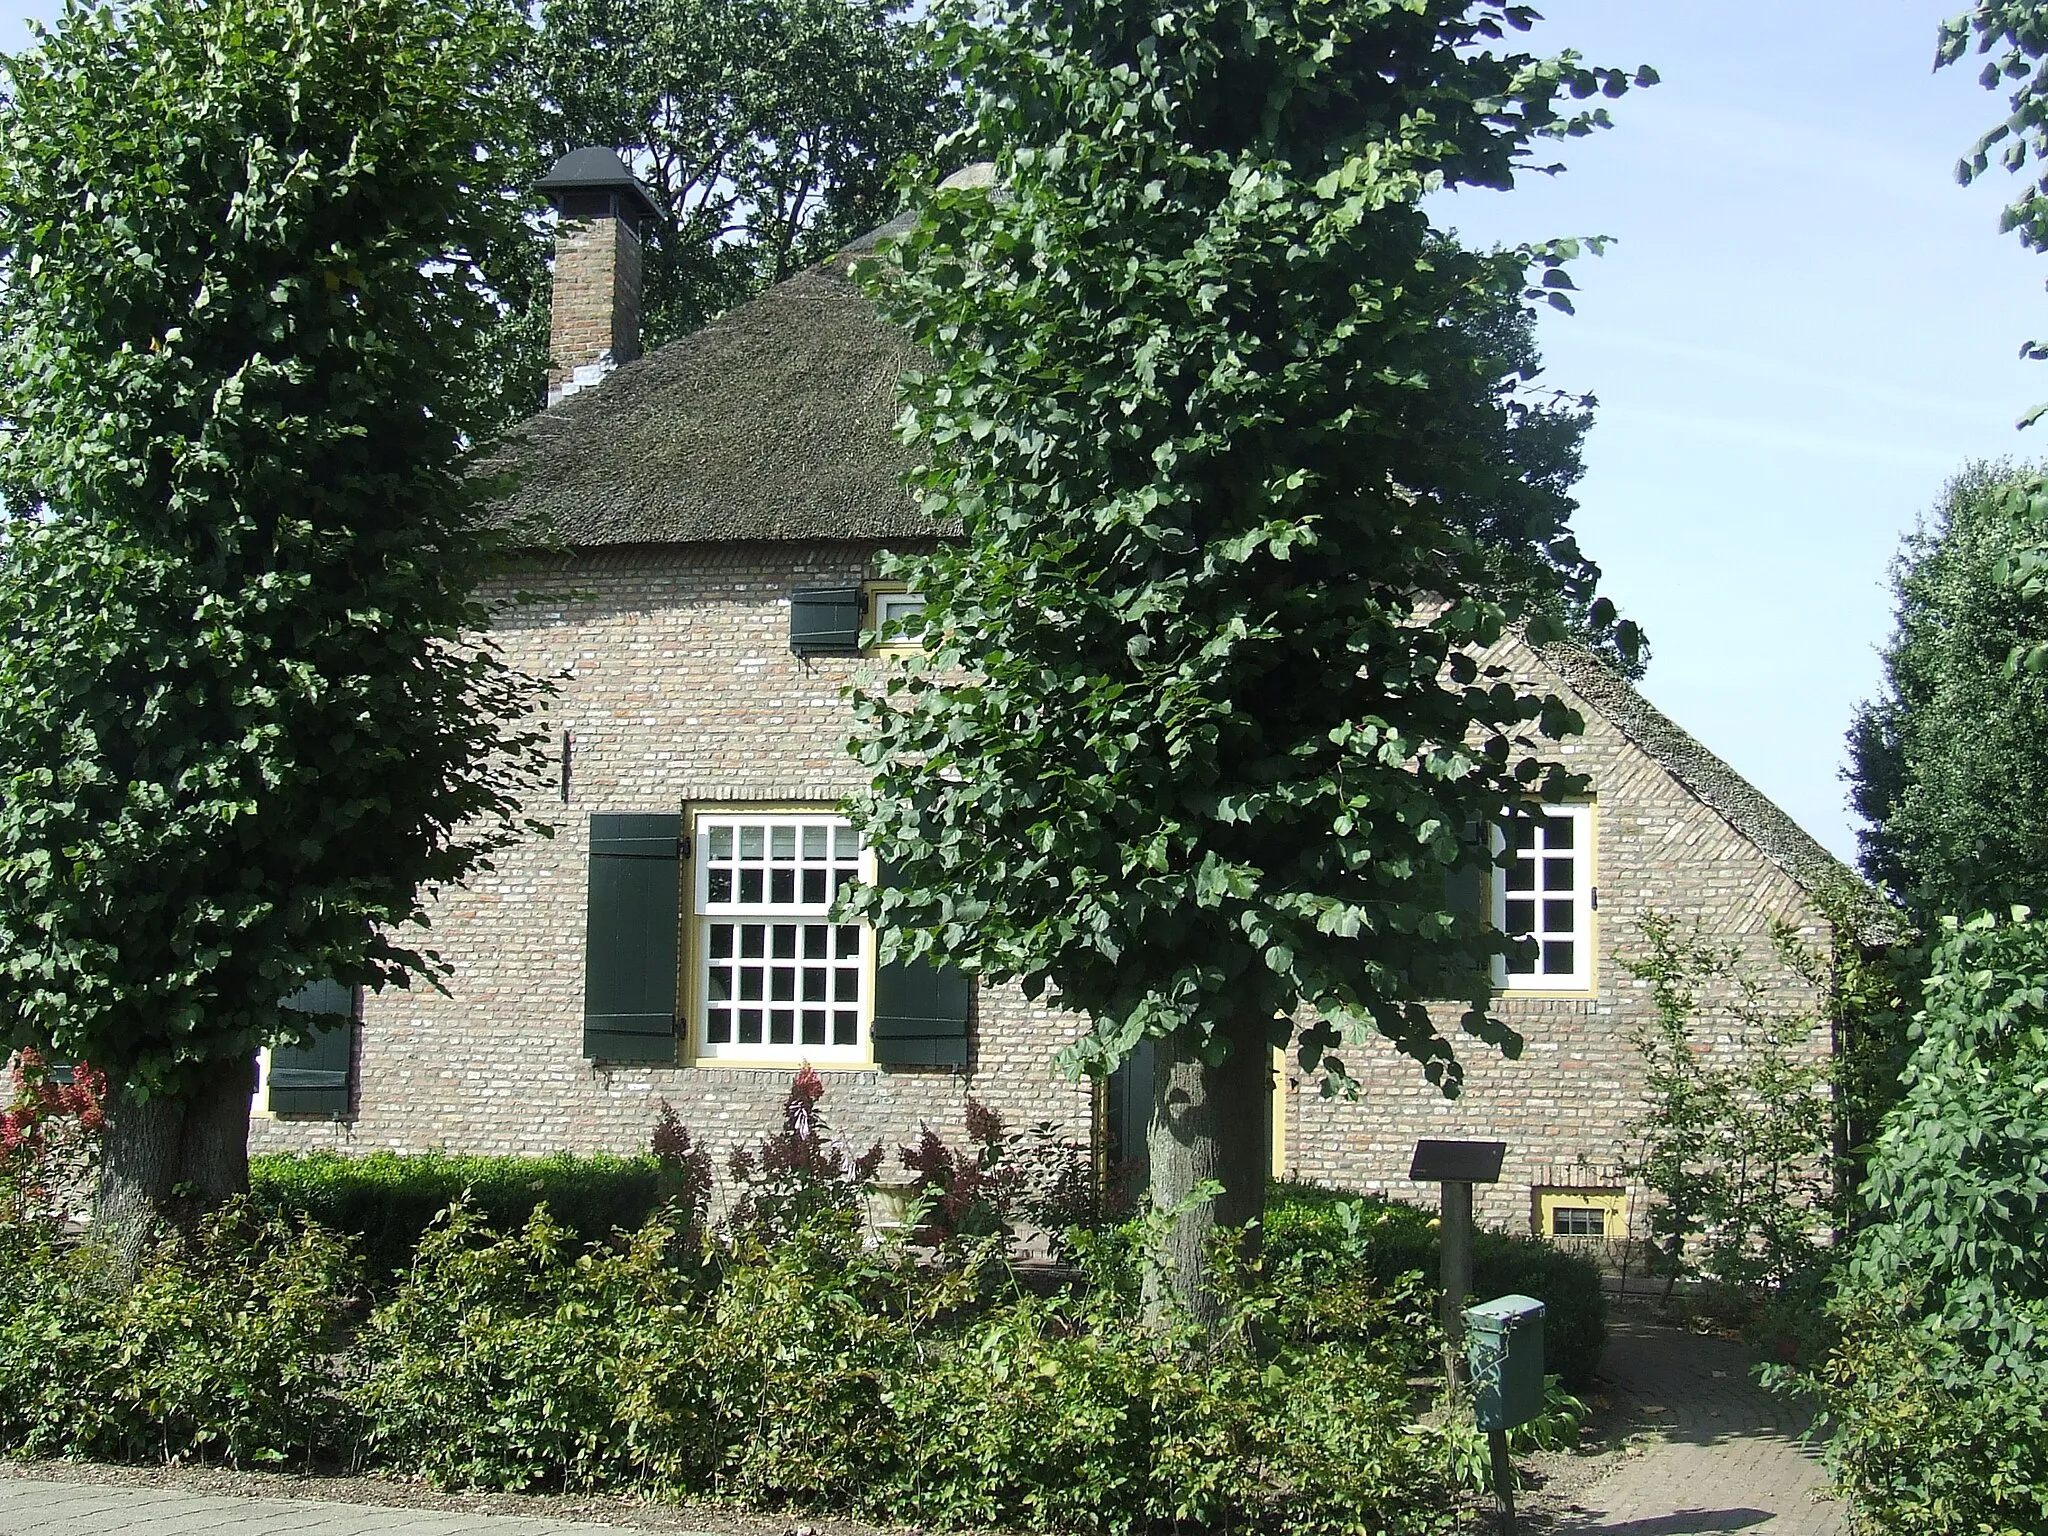 Photo showing: This is an image of rijksmonument number 9426